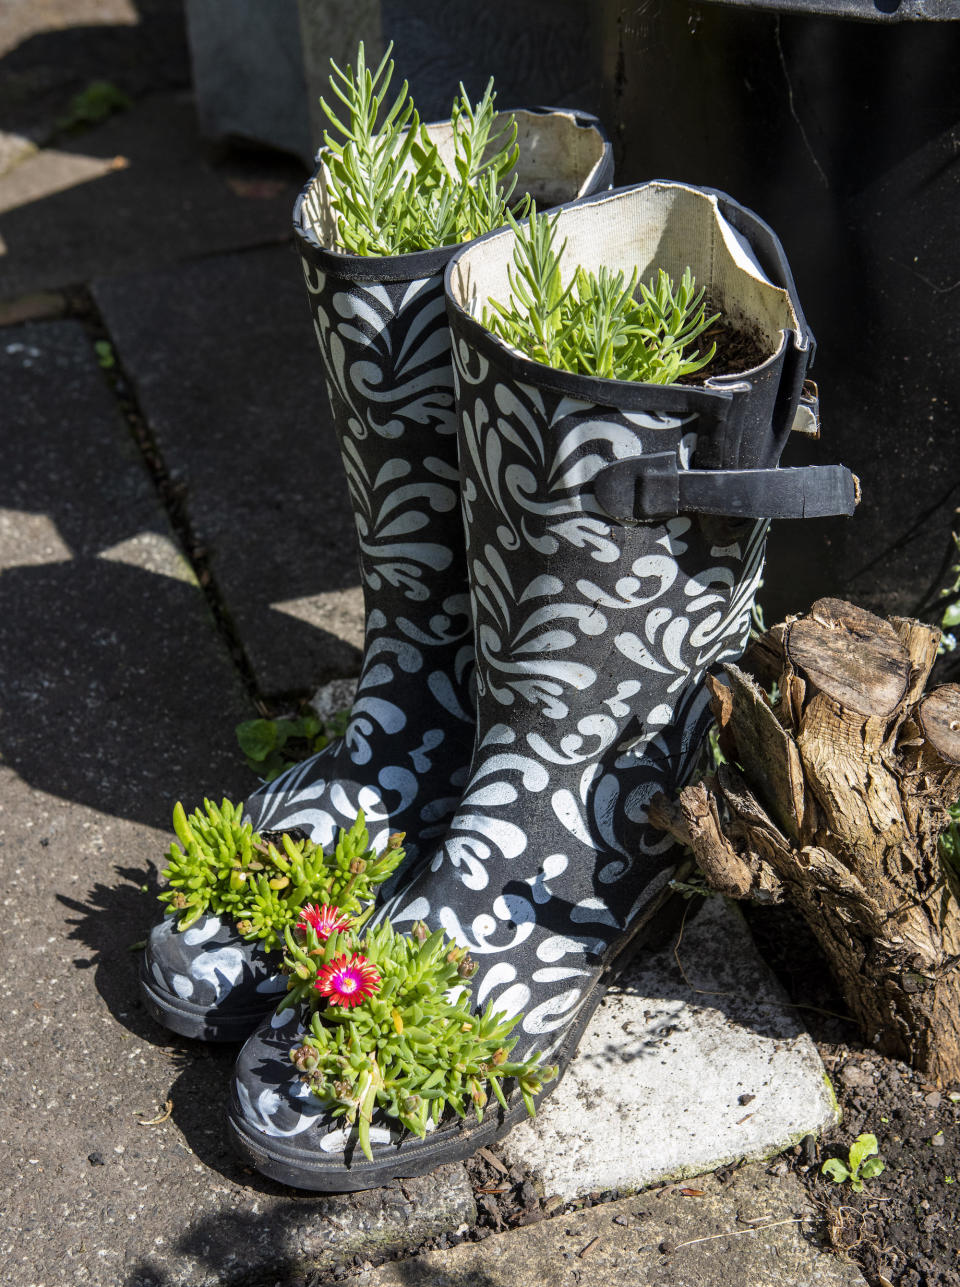 The grandma-of-four grew plants out of old boots. (SWNS)